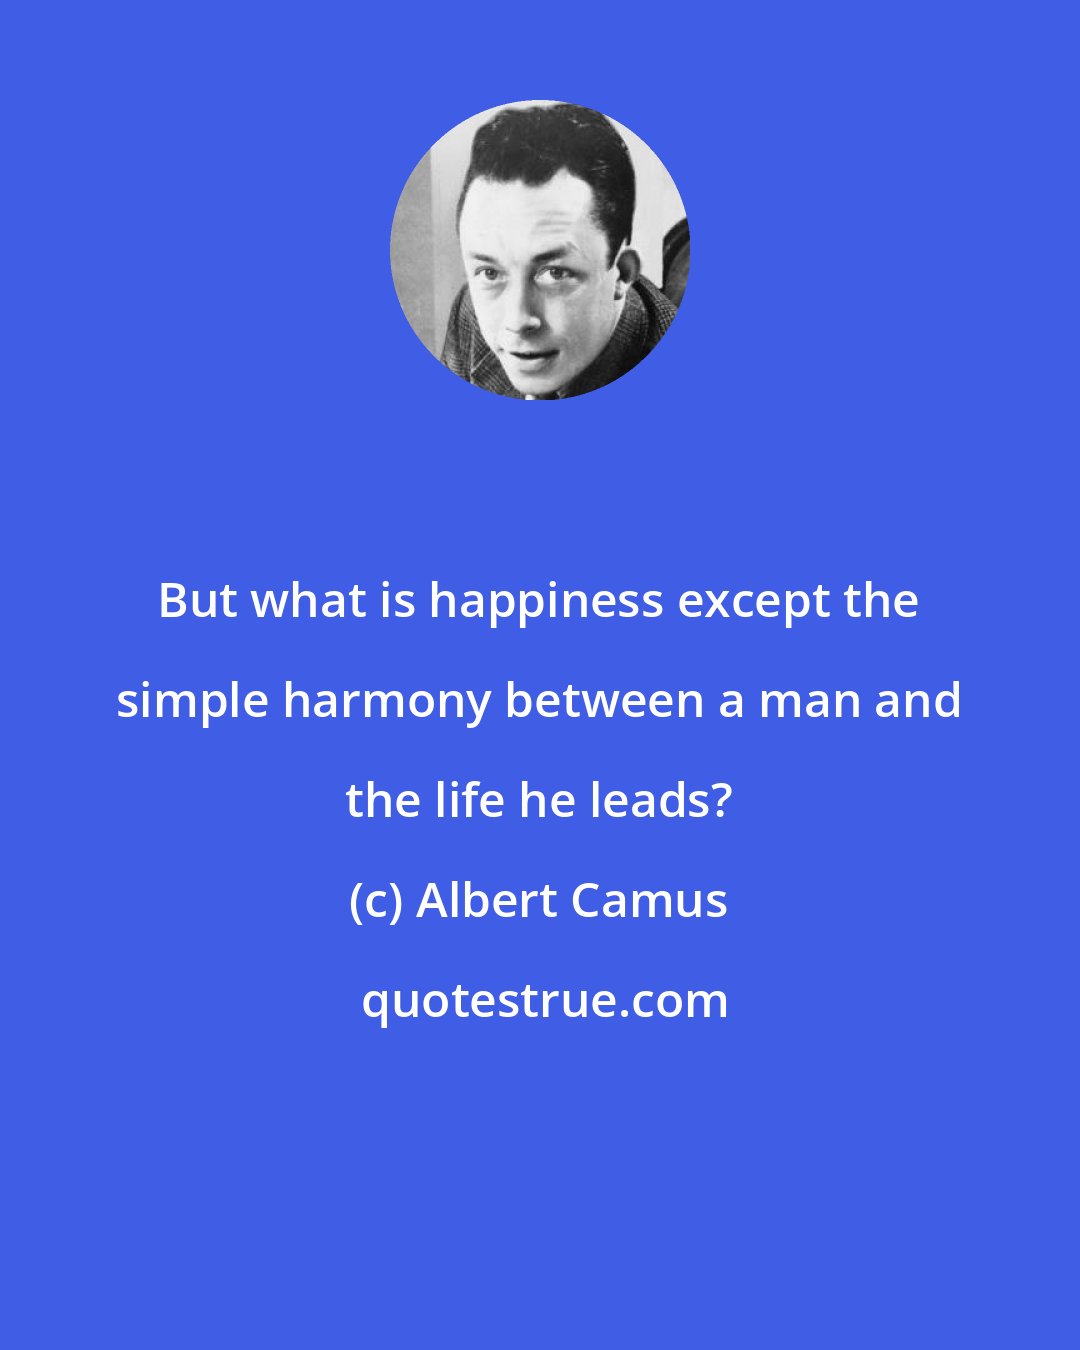 Albert Camus: But what is happiness except the simple harmony between a man and the life he leads?